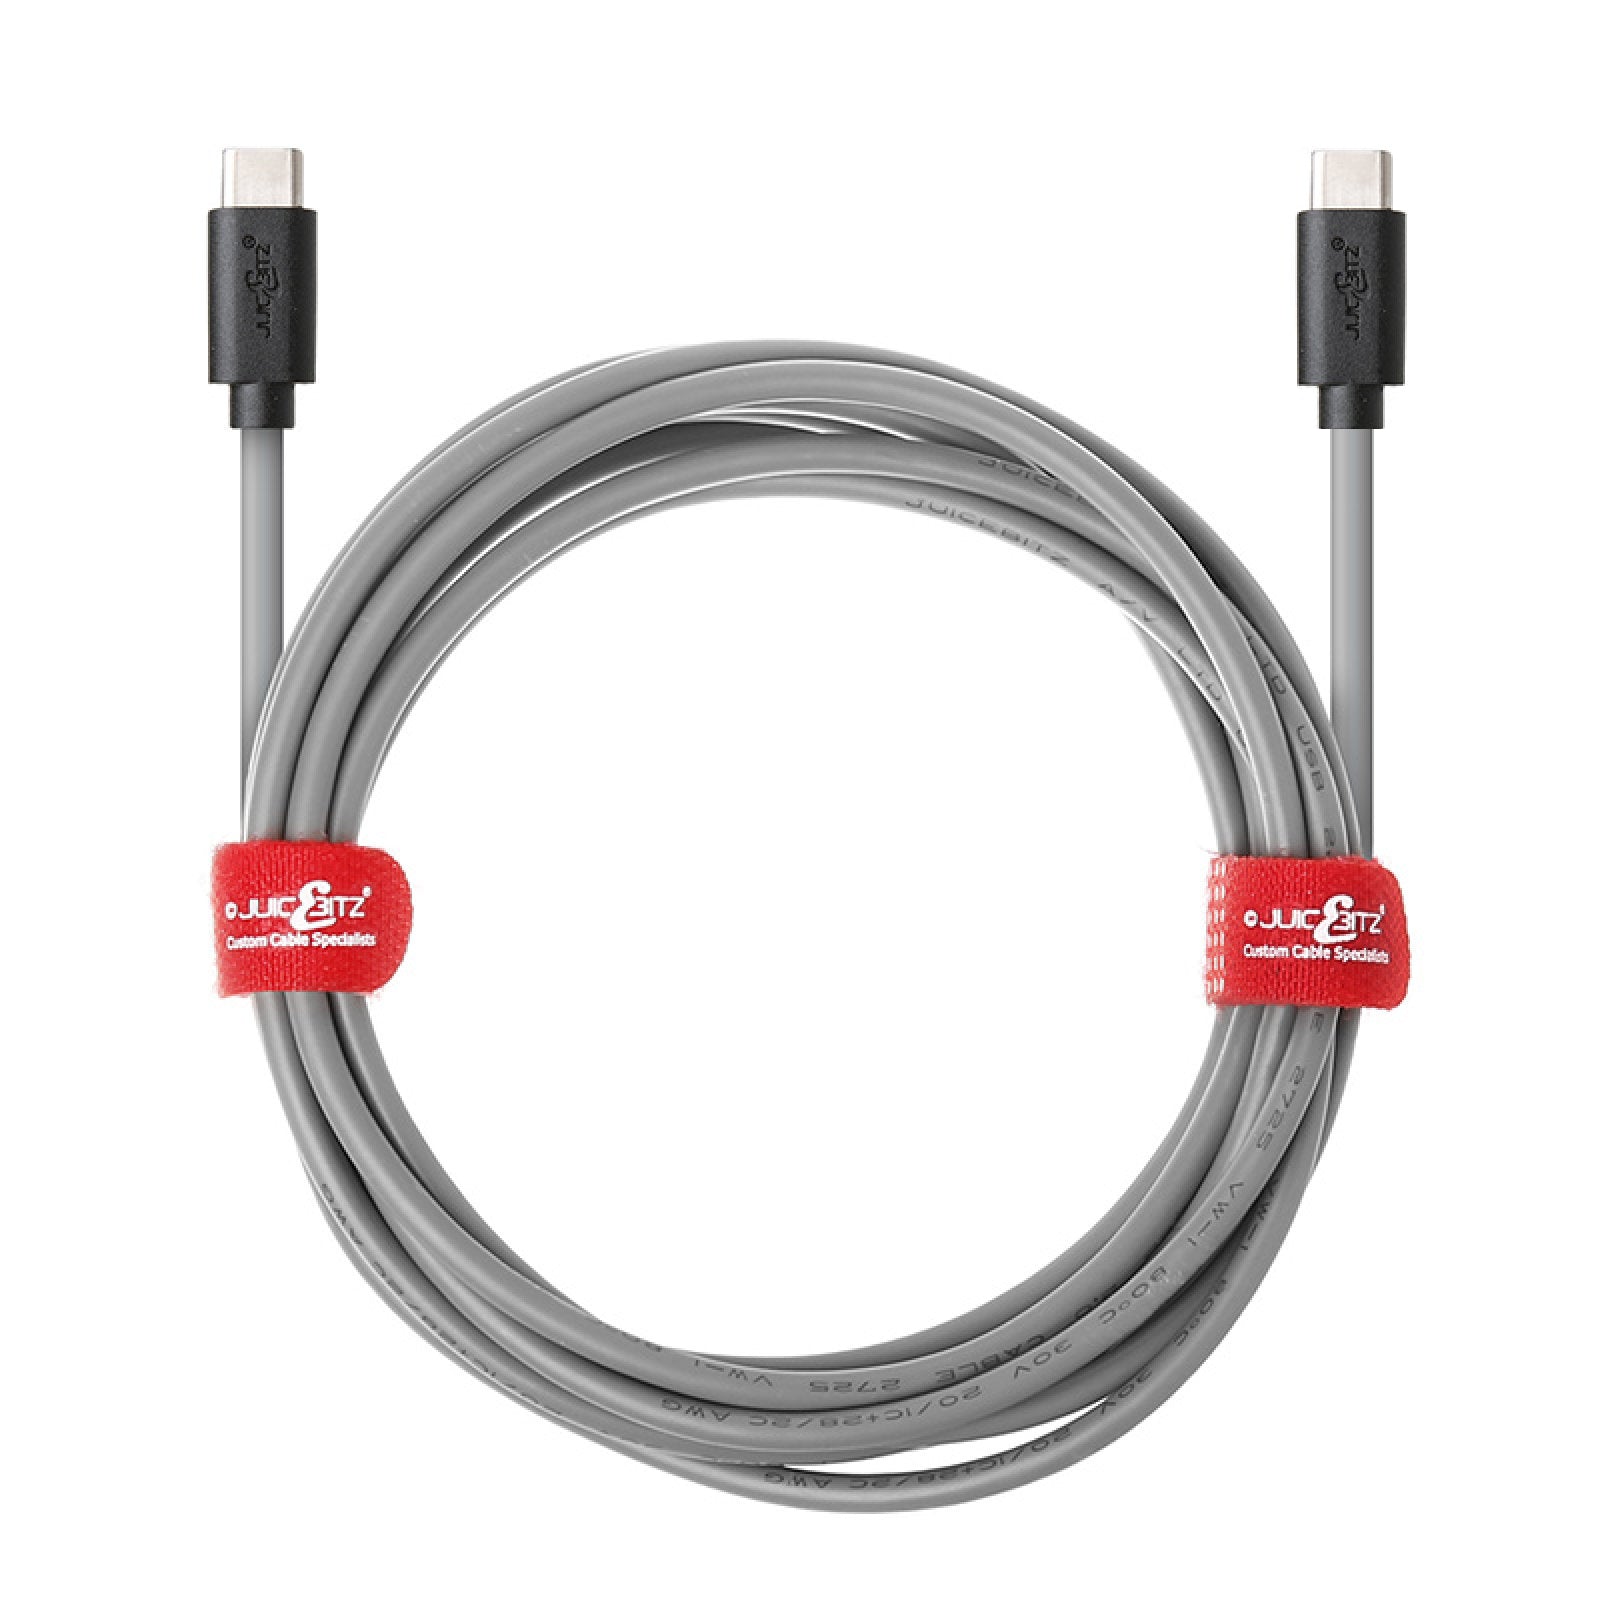 USB-C to USB-C 3A Charger Cable USB 2.0 Data Transfer Lead - Grey